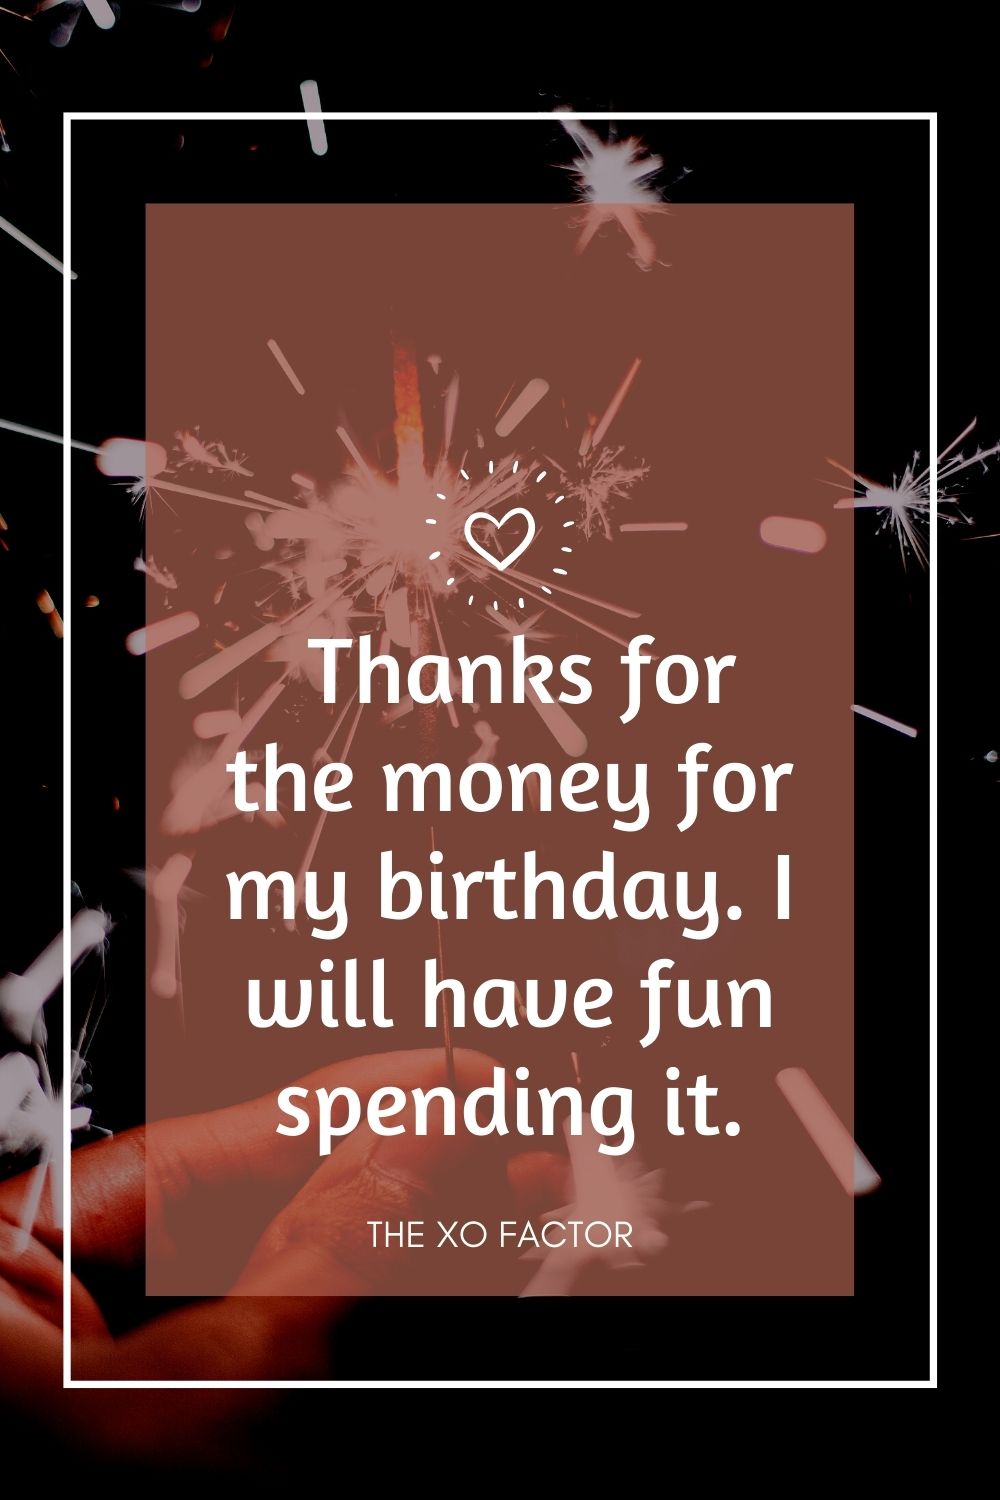 Thanks for the money for my birthday. I will have fun spending it.